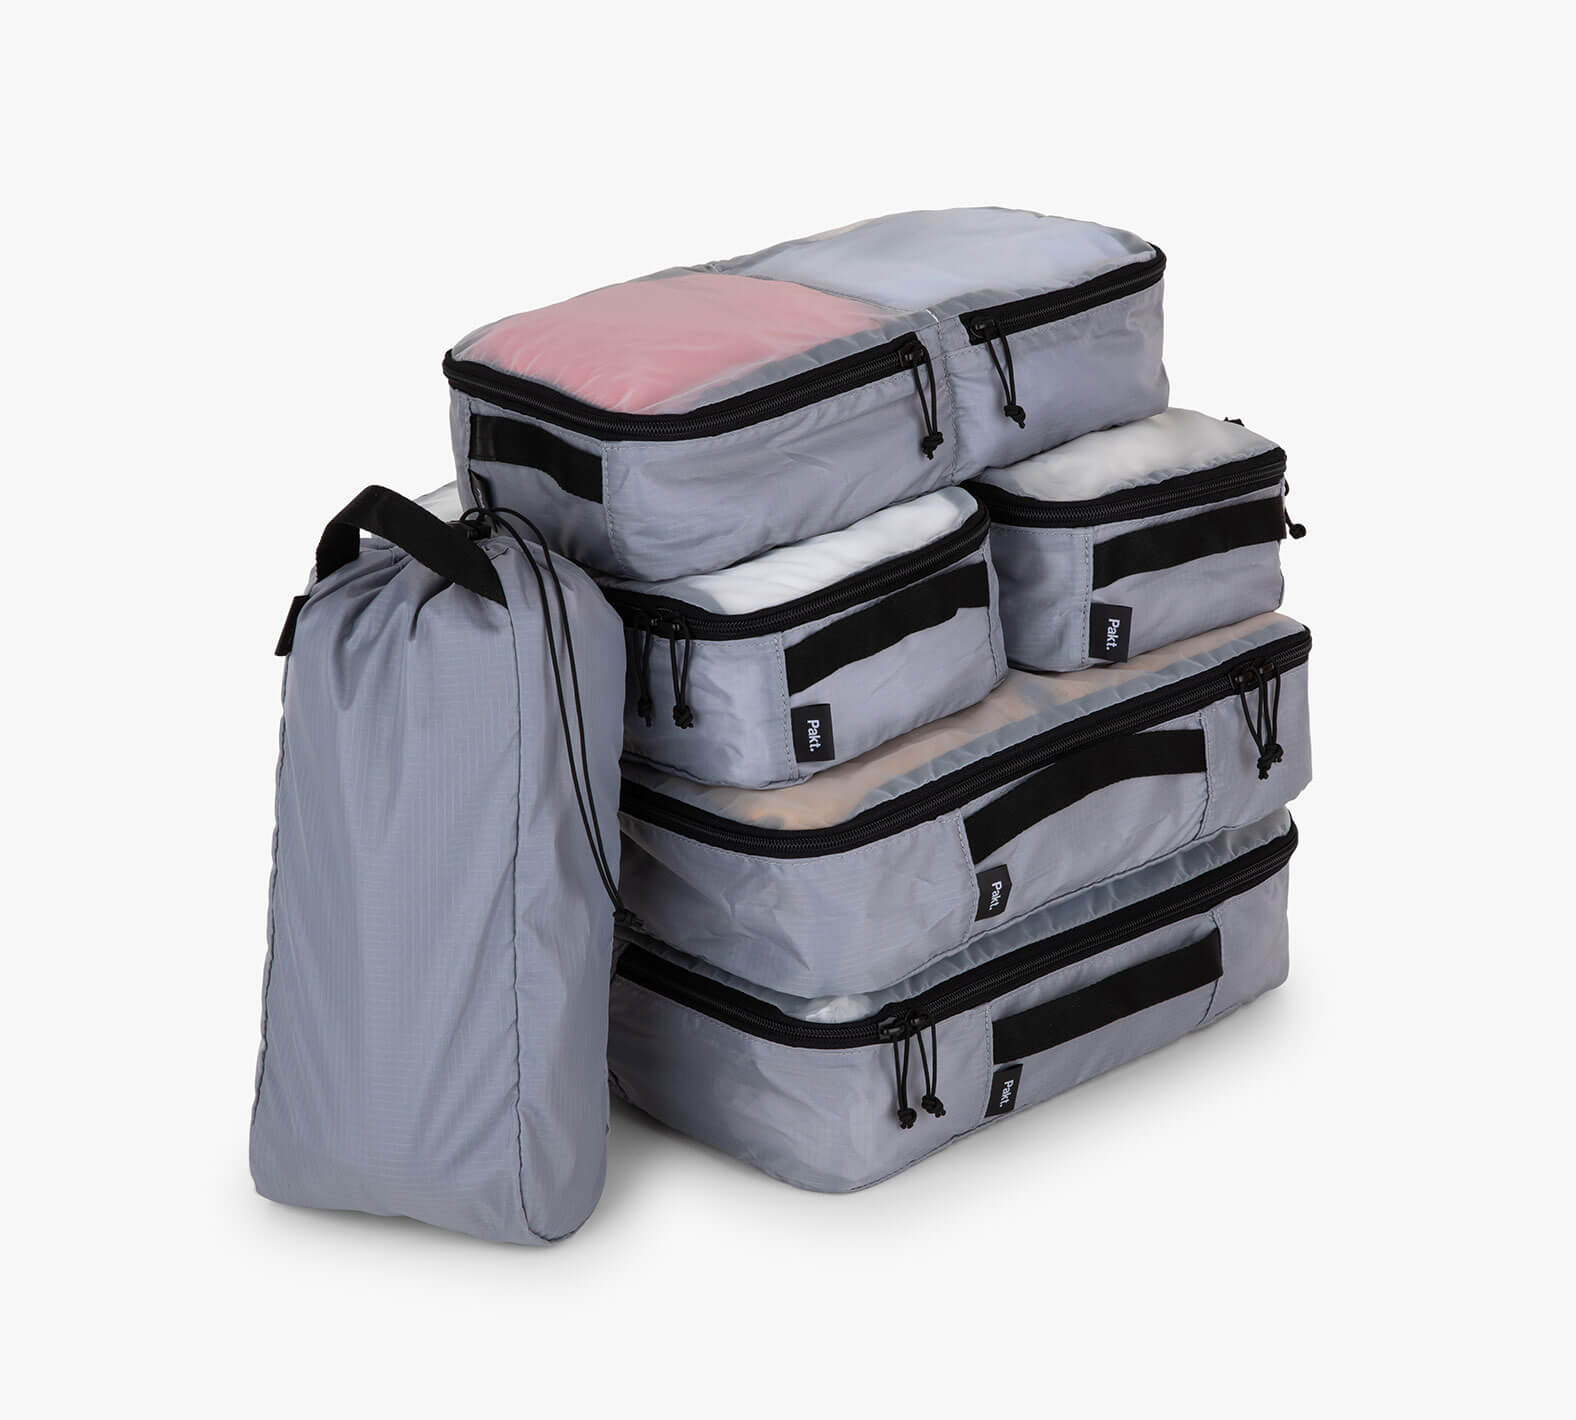 Pakt May Be The Travel Bag That Makes All Your Packing Dreams Come